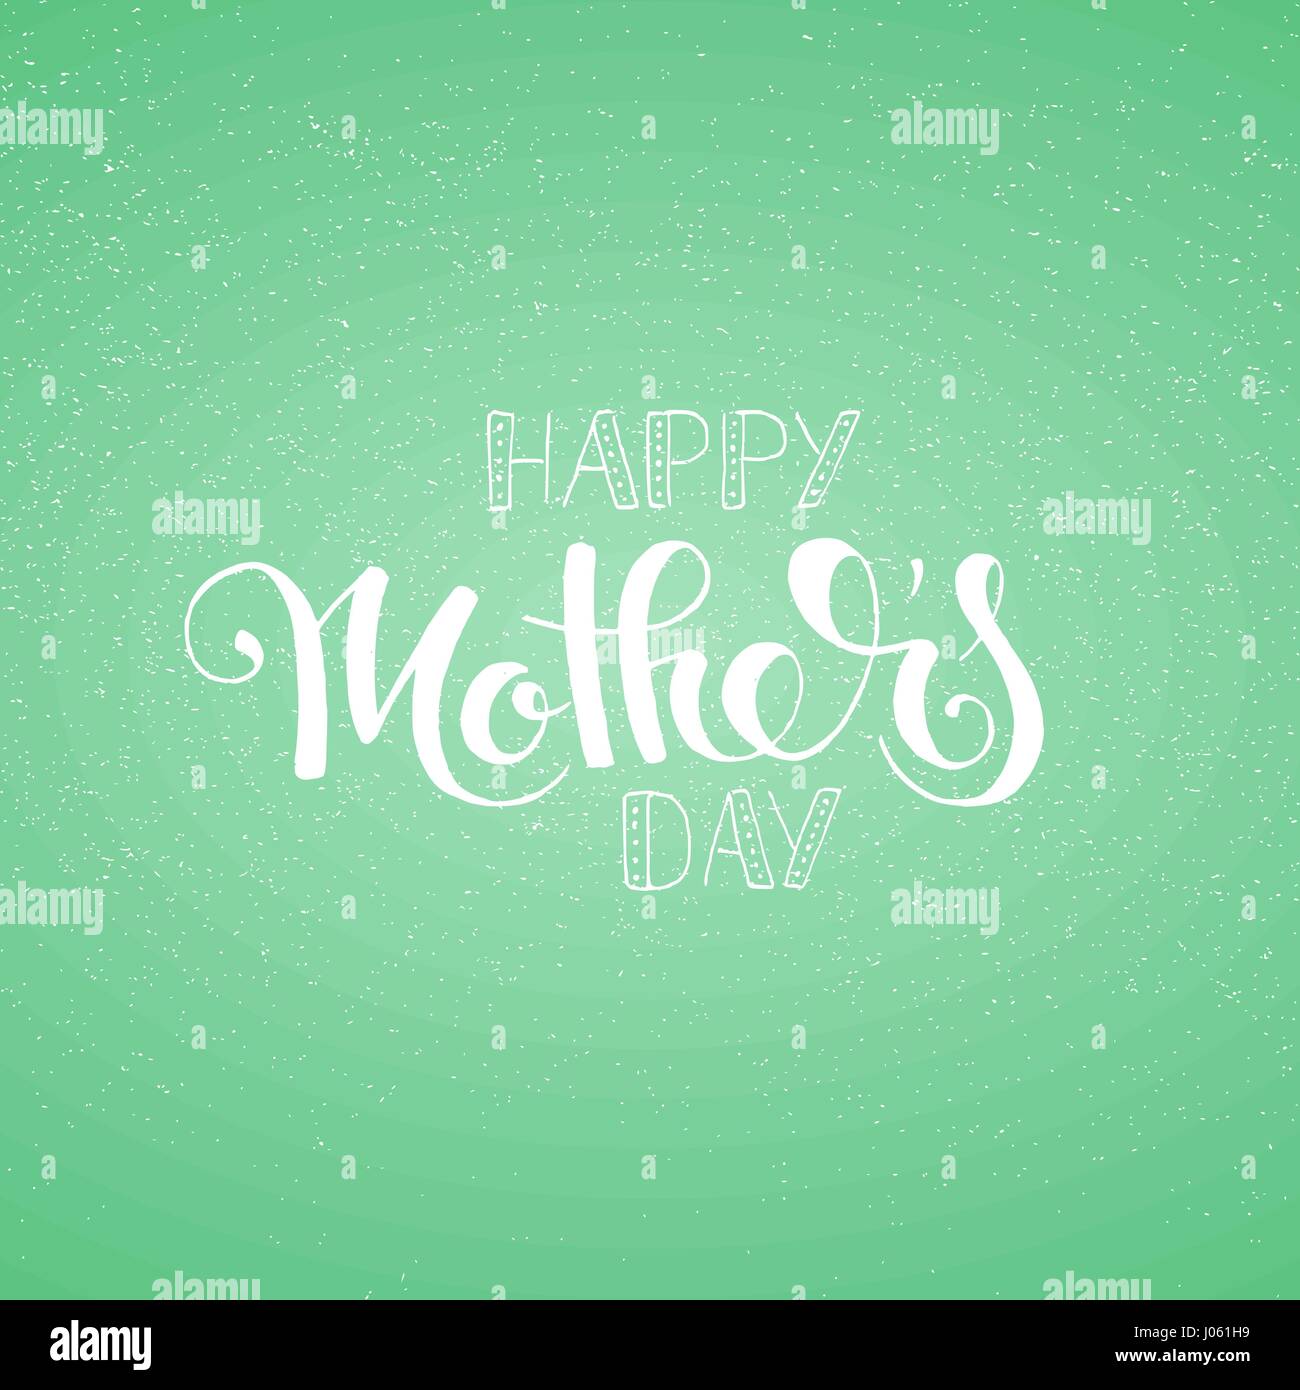 Happy Mother's day handwritten lettering. Modern vector hand drawn calligraphy with grunge overlay texture over light green background Stock Vector